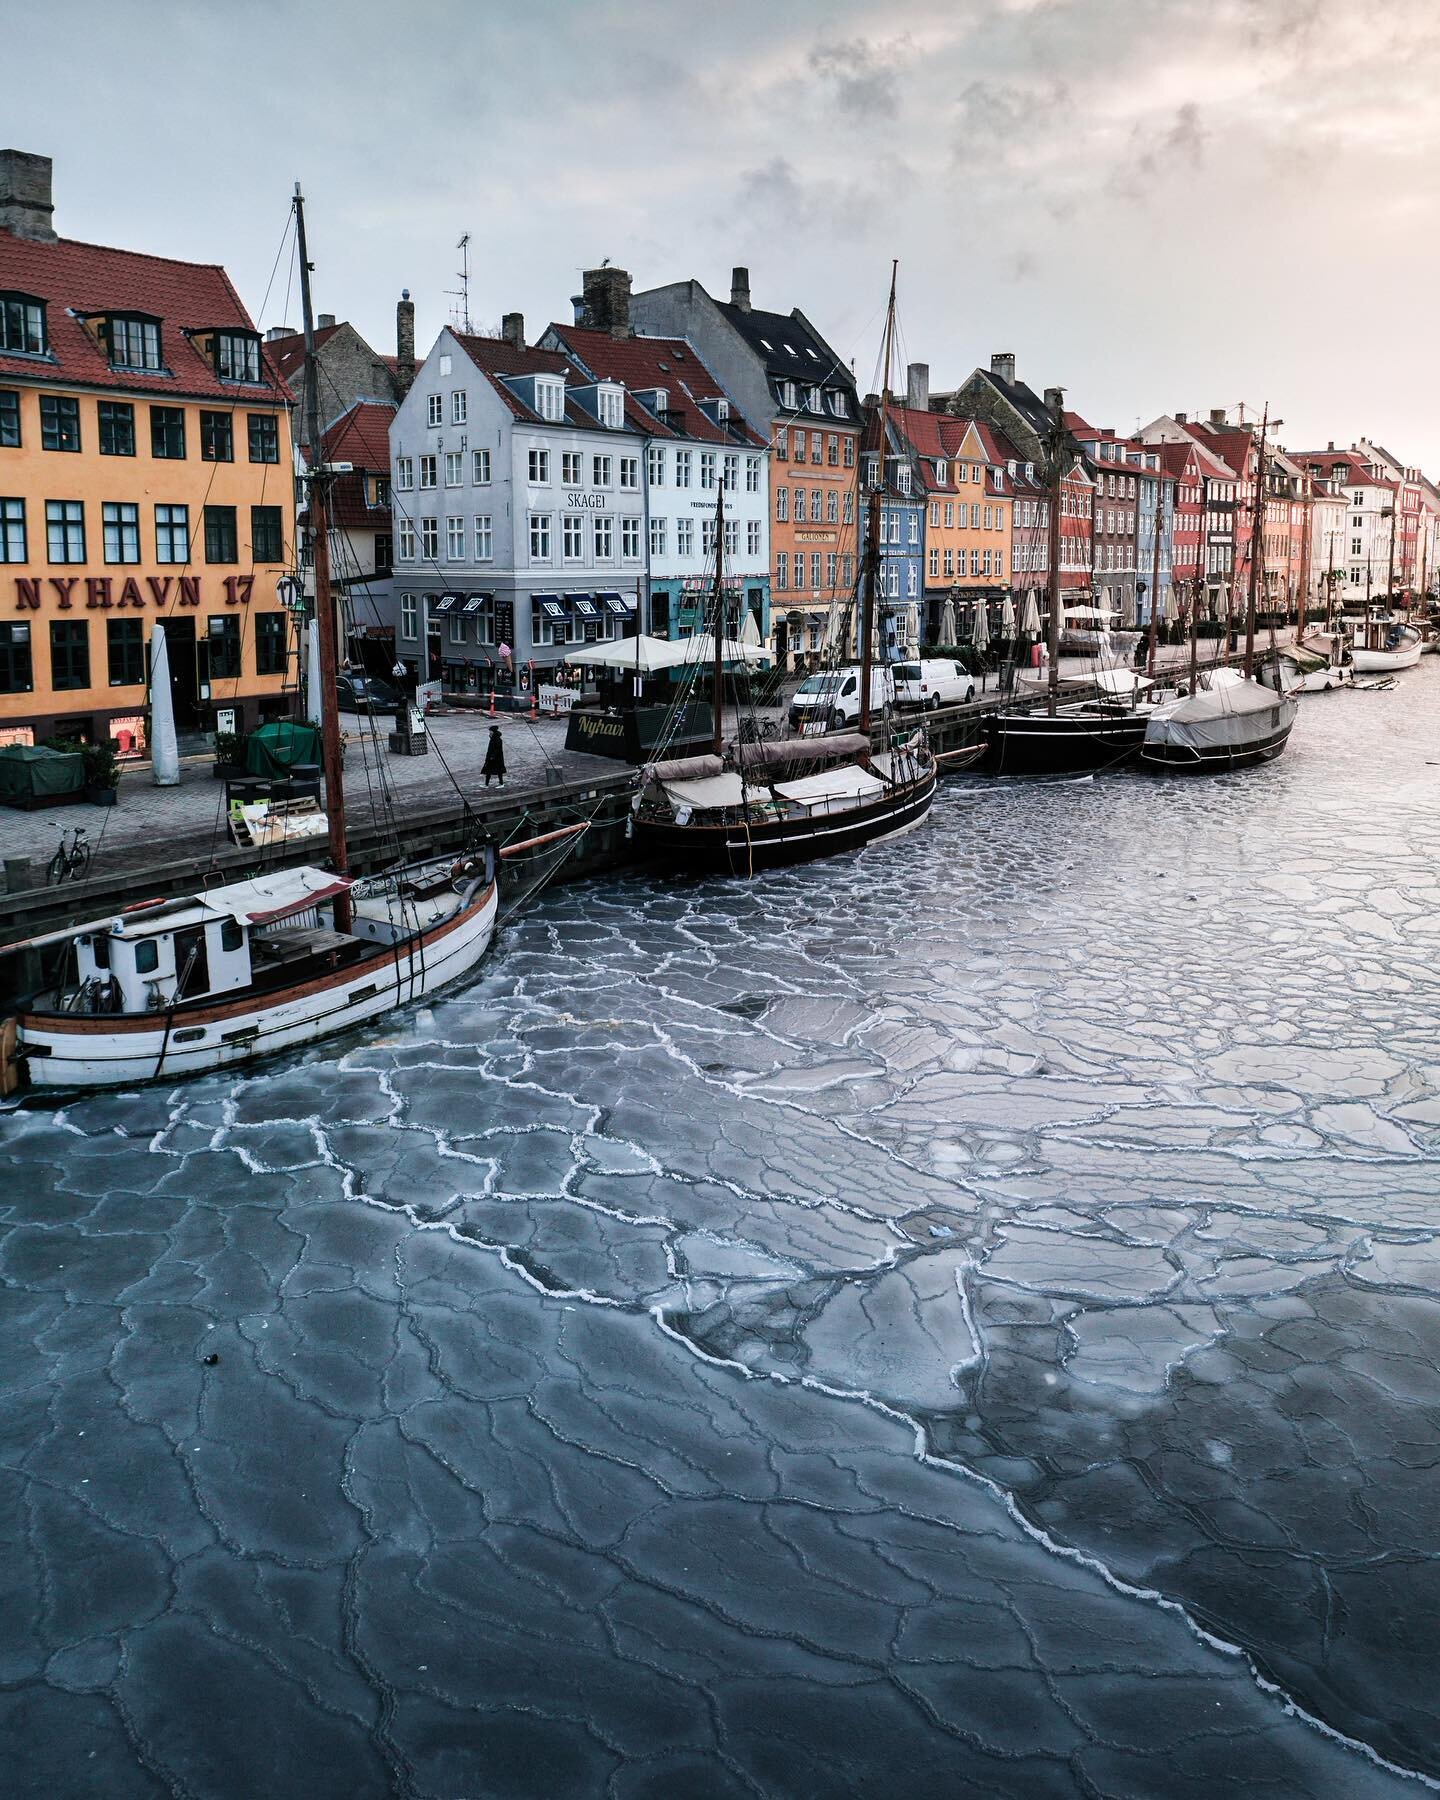 &bull; FROZEN &bull;

At bit late to the game with the frozen Nyhavn, but figured Copenhagen Instagram pictures was saturated with Nyhavn pictures during the cold week anyway 😅 well here is my take on this winther classic ❄️